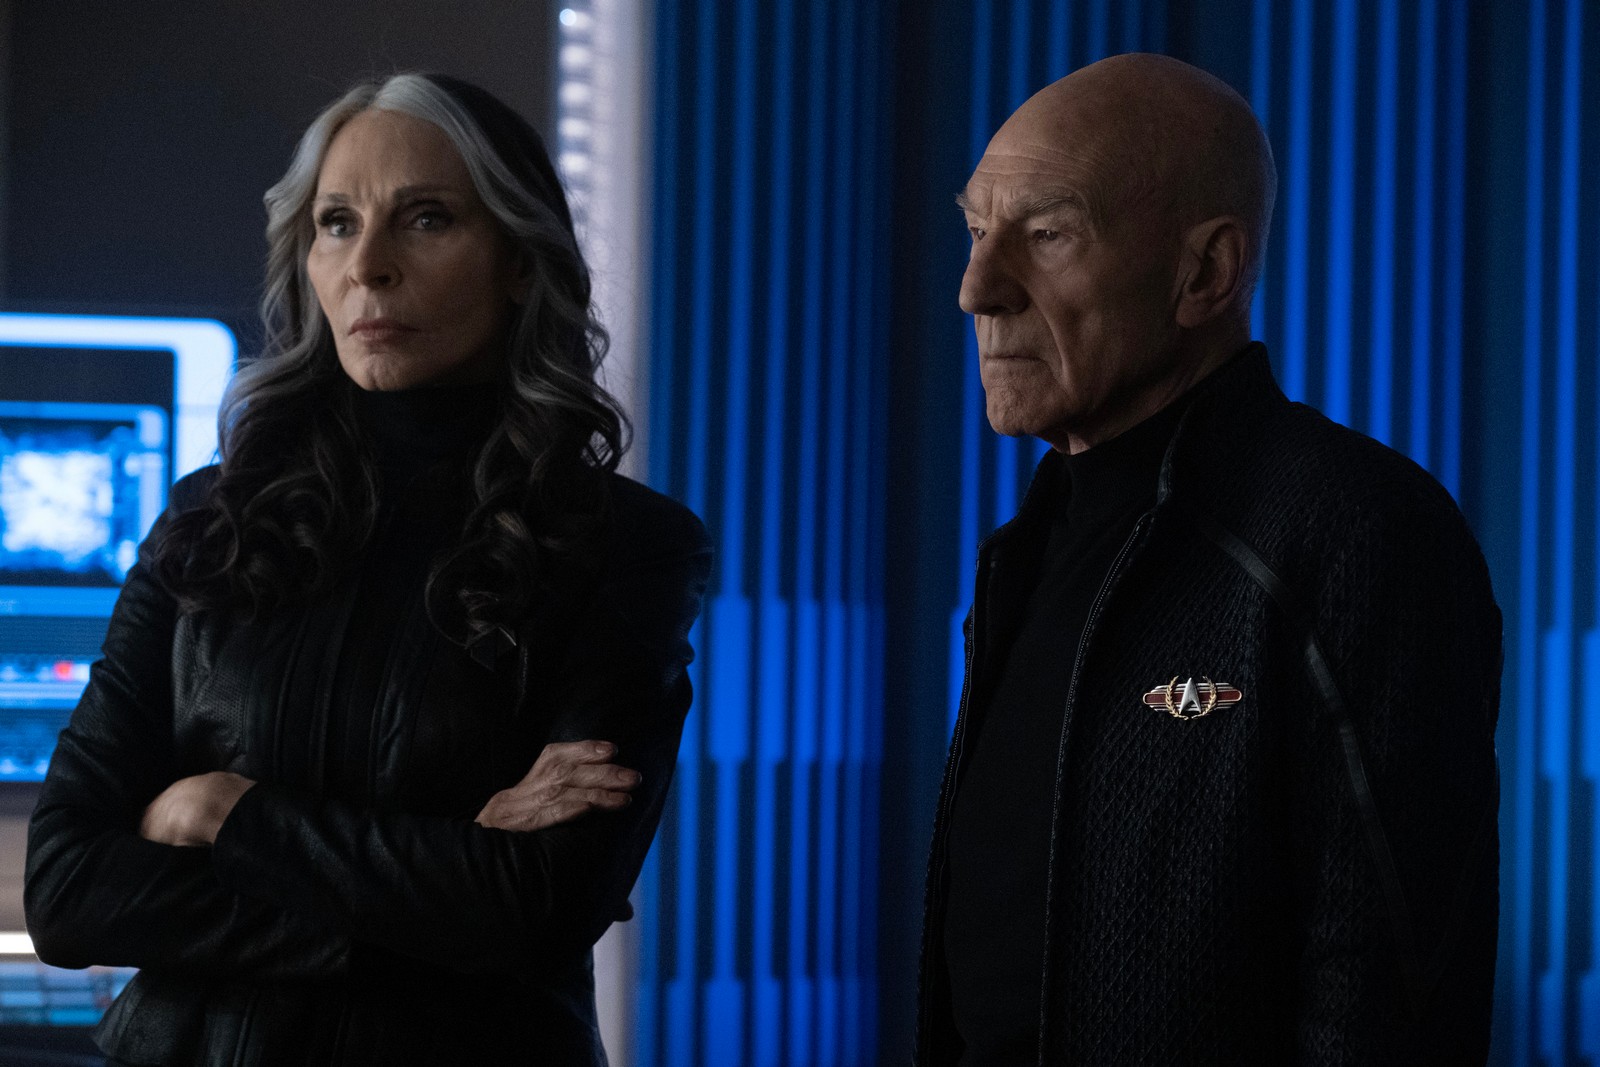 Gates McFadden as Dr. Beverly Crusher and Patrick Stewart as Picard in "Vox" Episode 309, Star Trek: Picard on Paramount+. Photo Credit: Trae Patton/Paramount+. ©2021 Viacom, International Inc. All Rights Reserved.